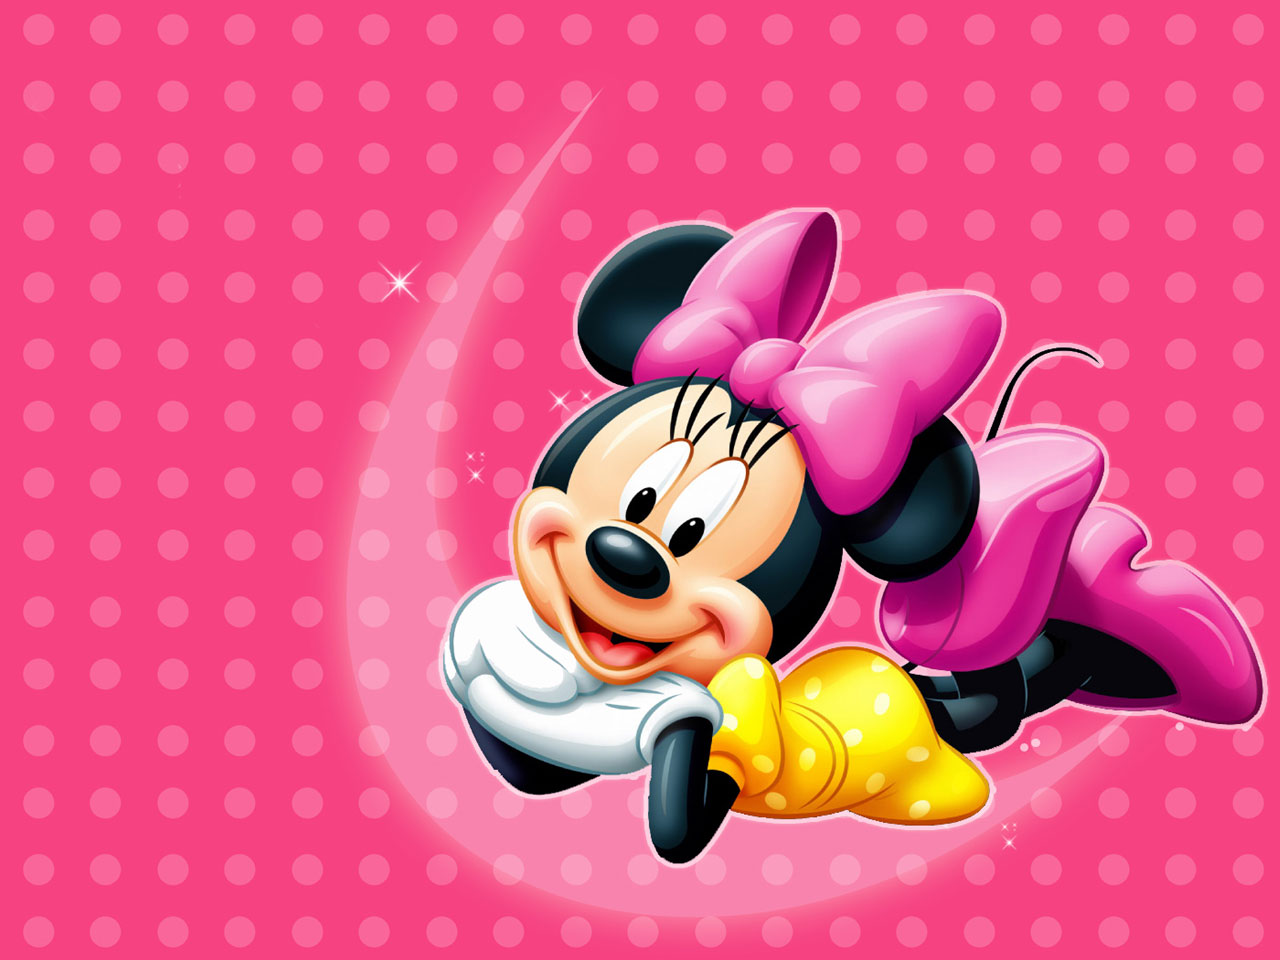 Mickey Mouse Hd Wallpapers   Mickey Mouse Cartoon Images   Cool    